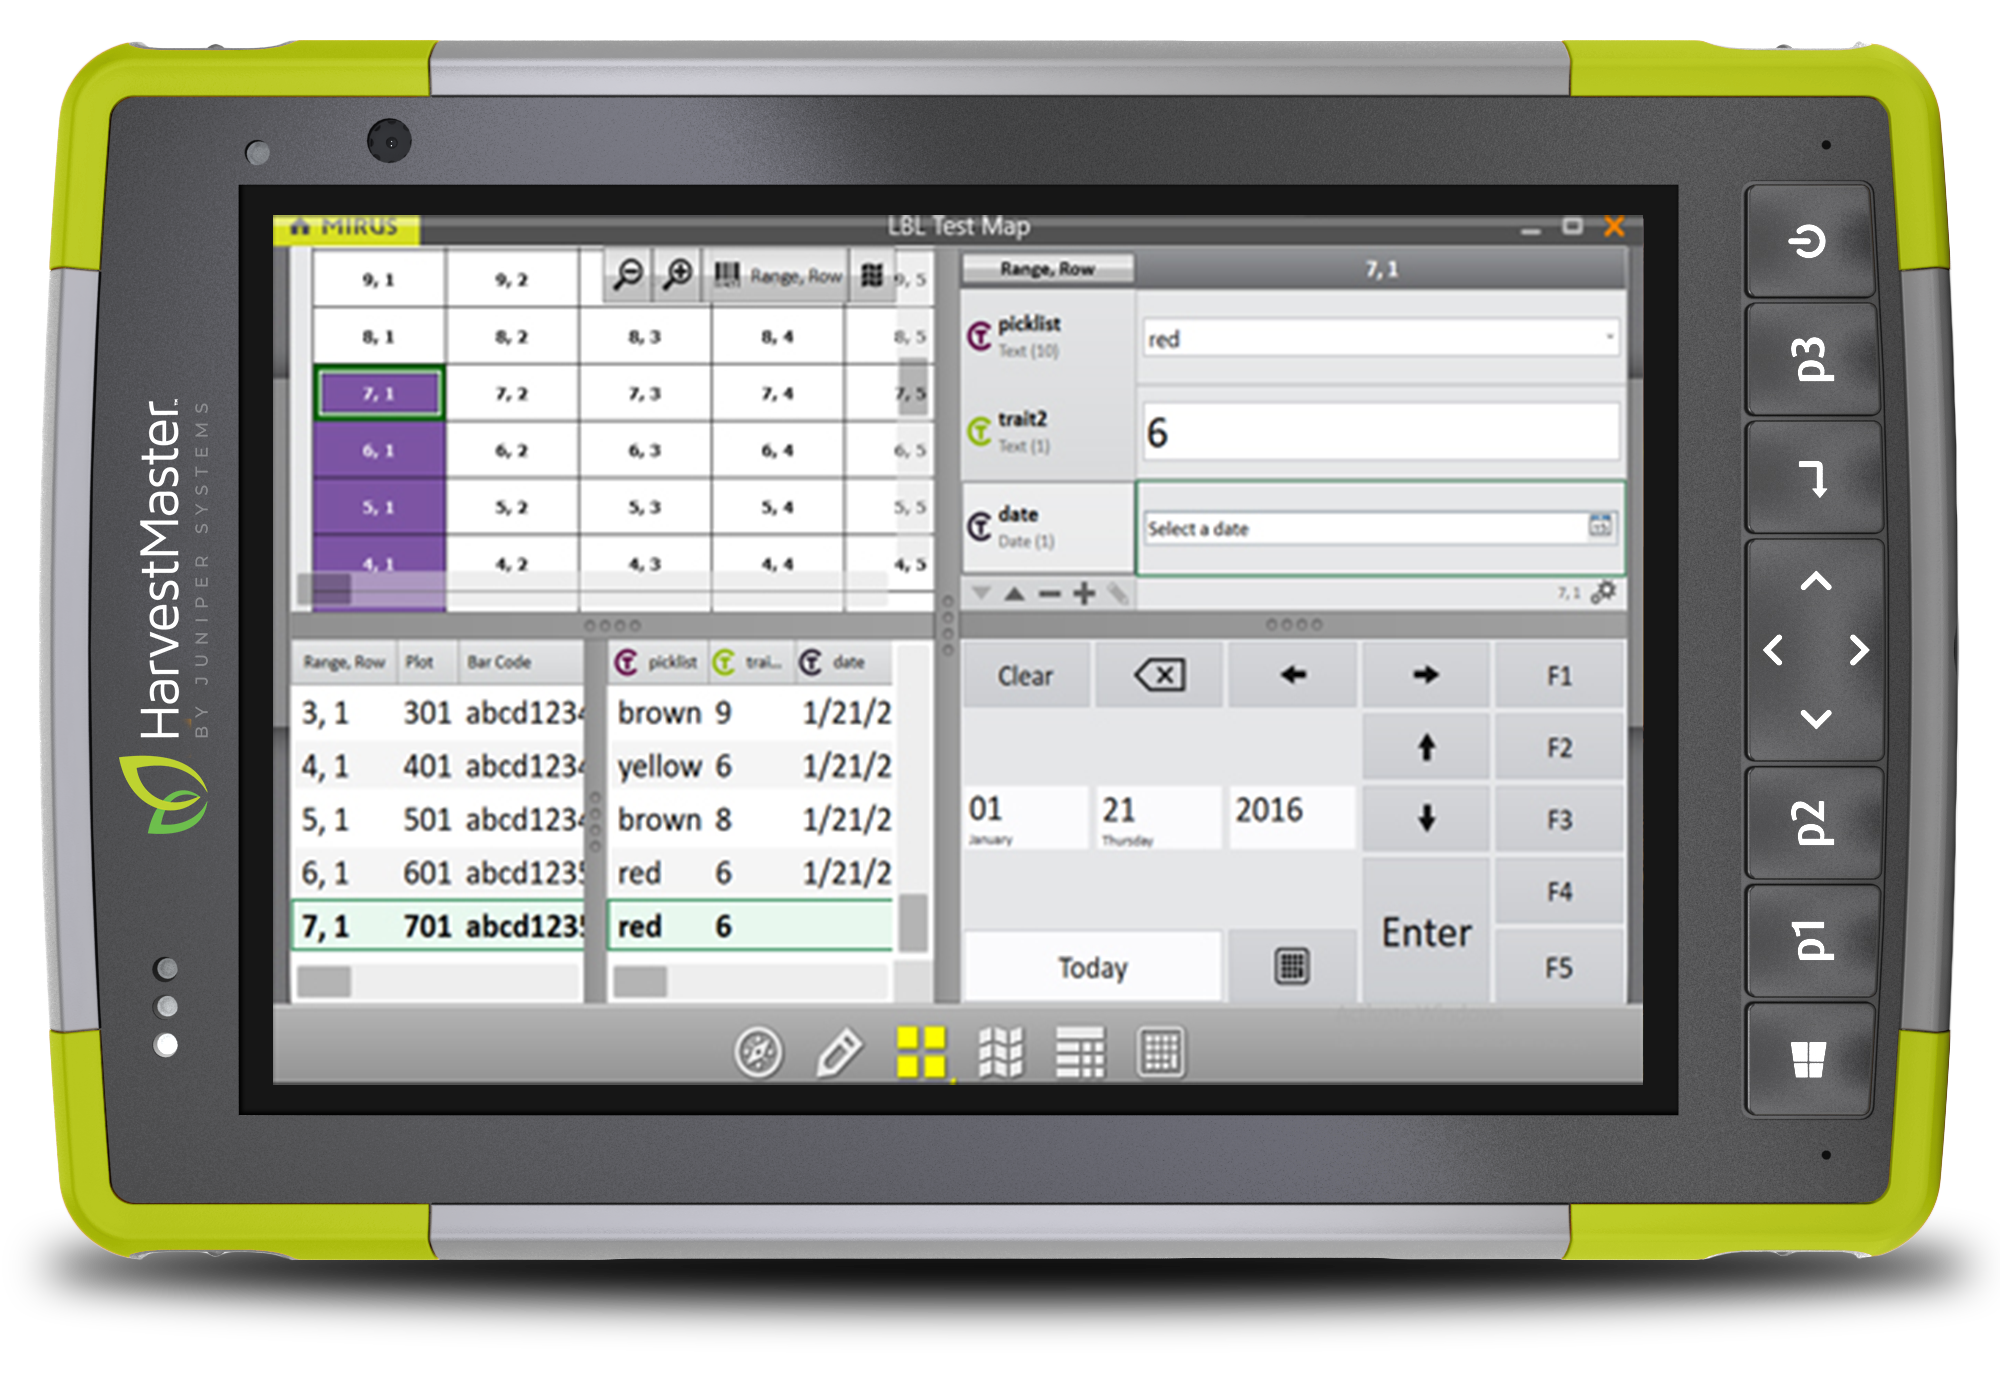 Image of the Mesa tablet showing Plug-In functions of the Mirus software